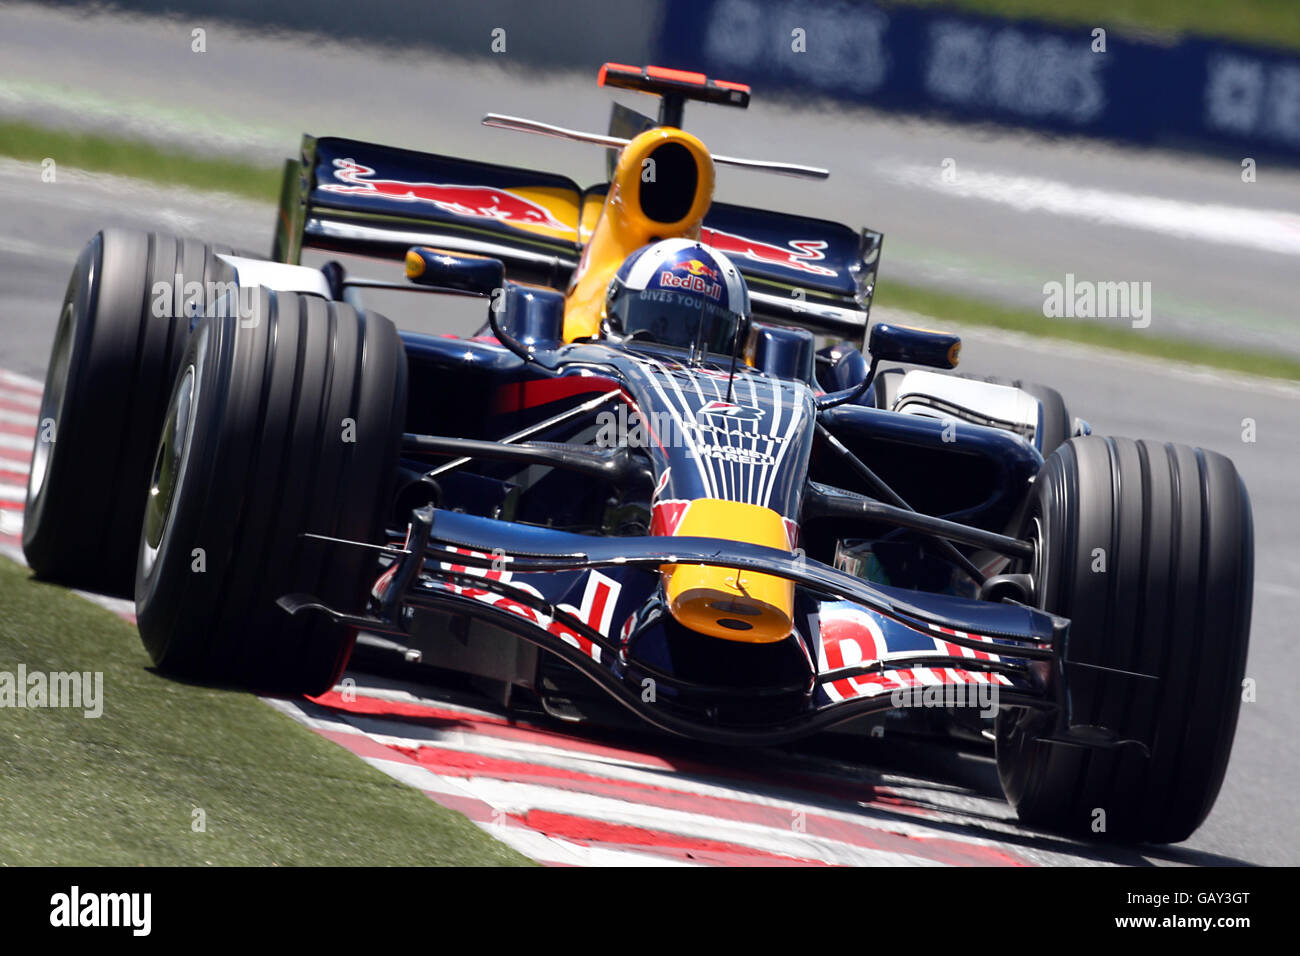 Formula One Motor Racing - French Grand Prix - Qualifying - Magny Cours. Red Bull Racing's David Coulthard during qualifying for the Grand Prix at Magny-Cours, Nevers, France. Stock Photo